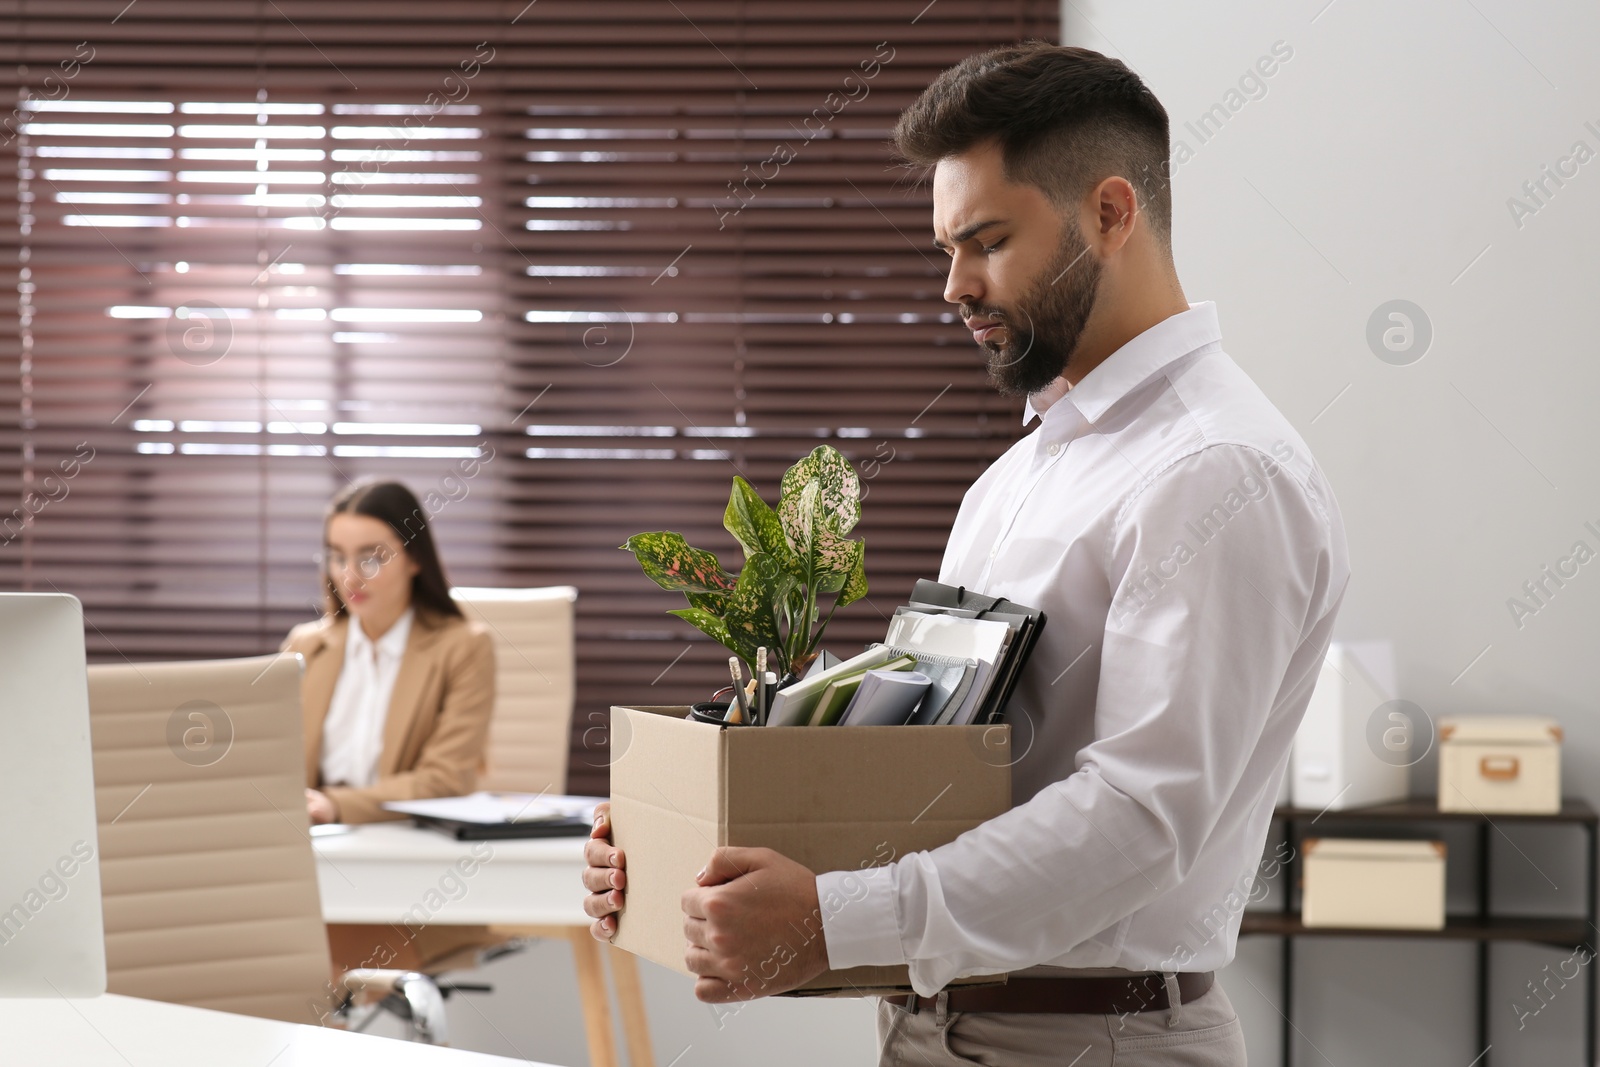 Photo of Upset dismissed man carrying box with personal stuff in office